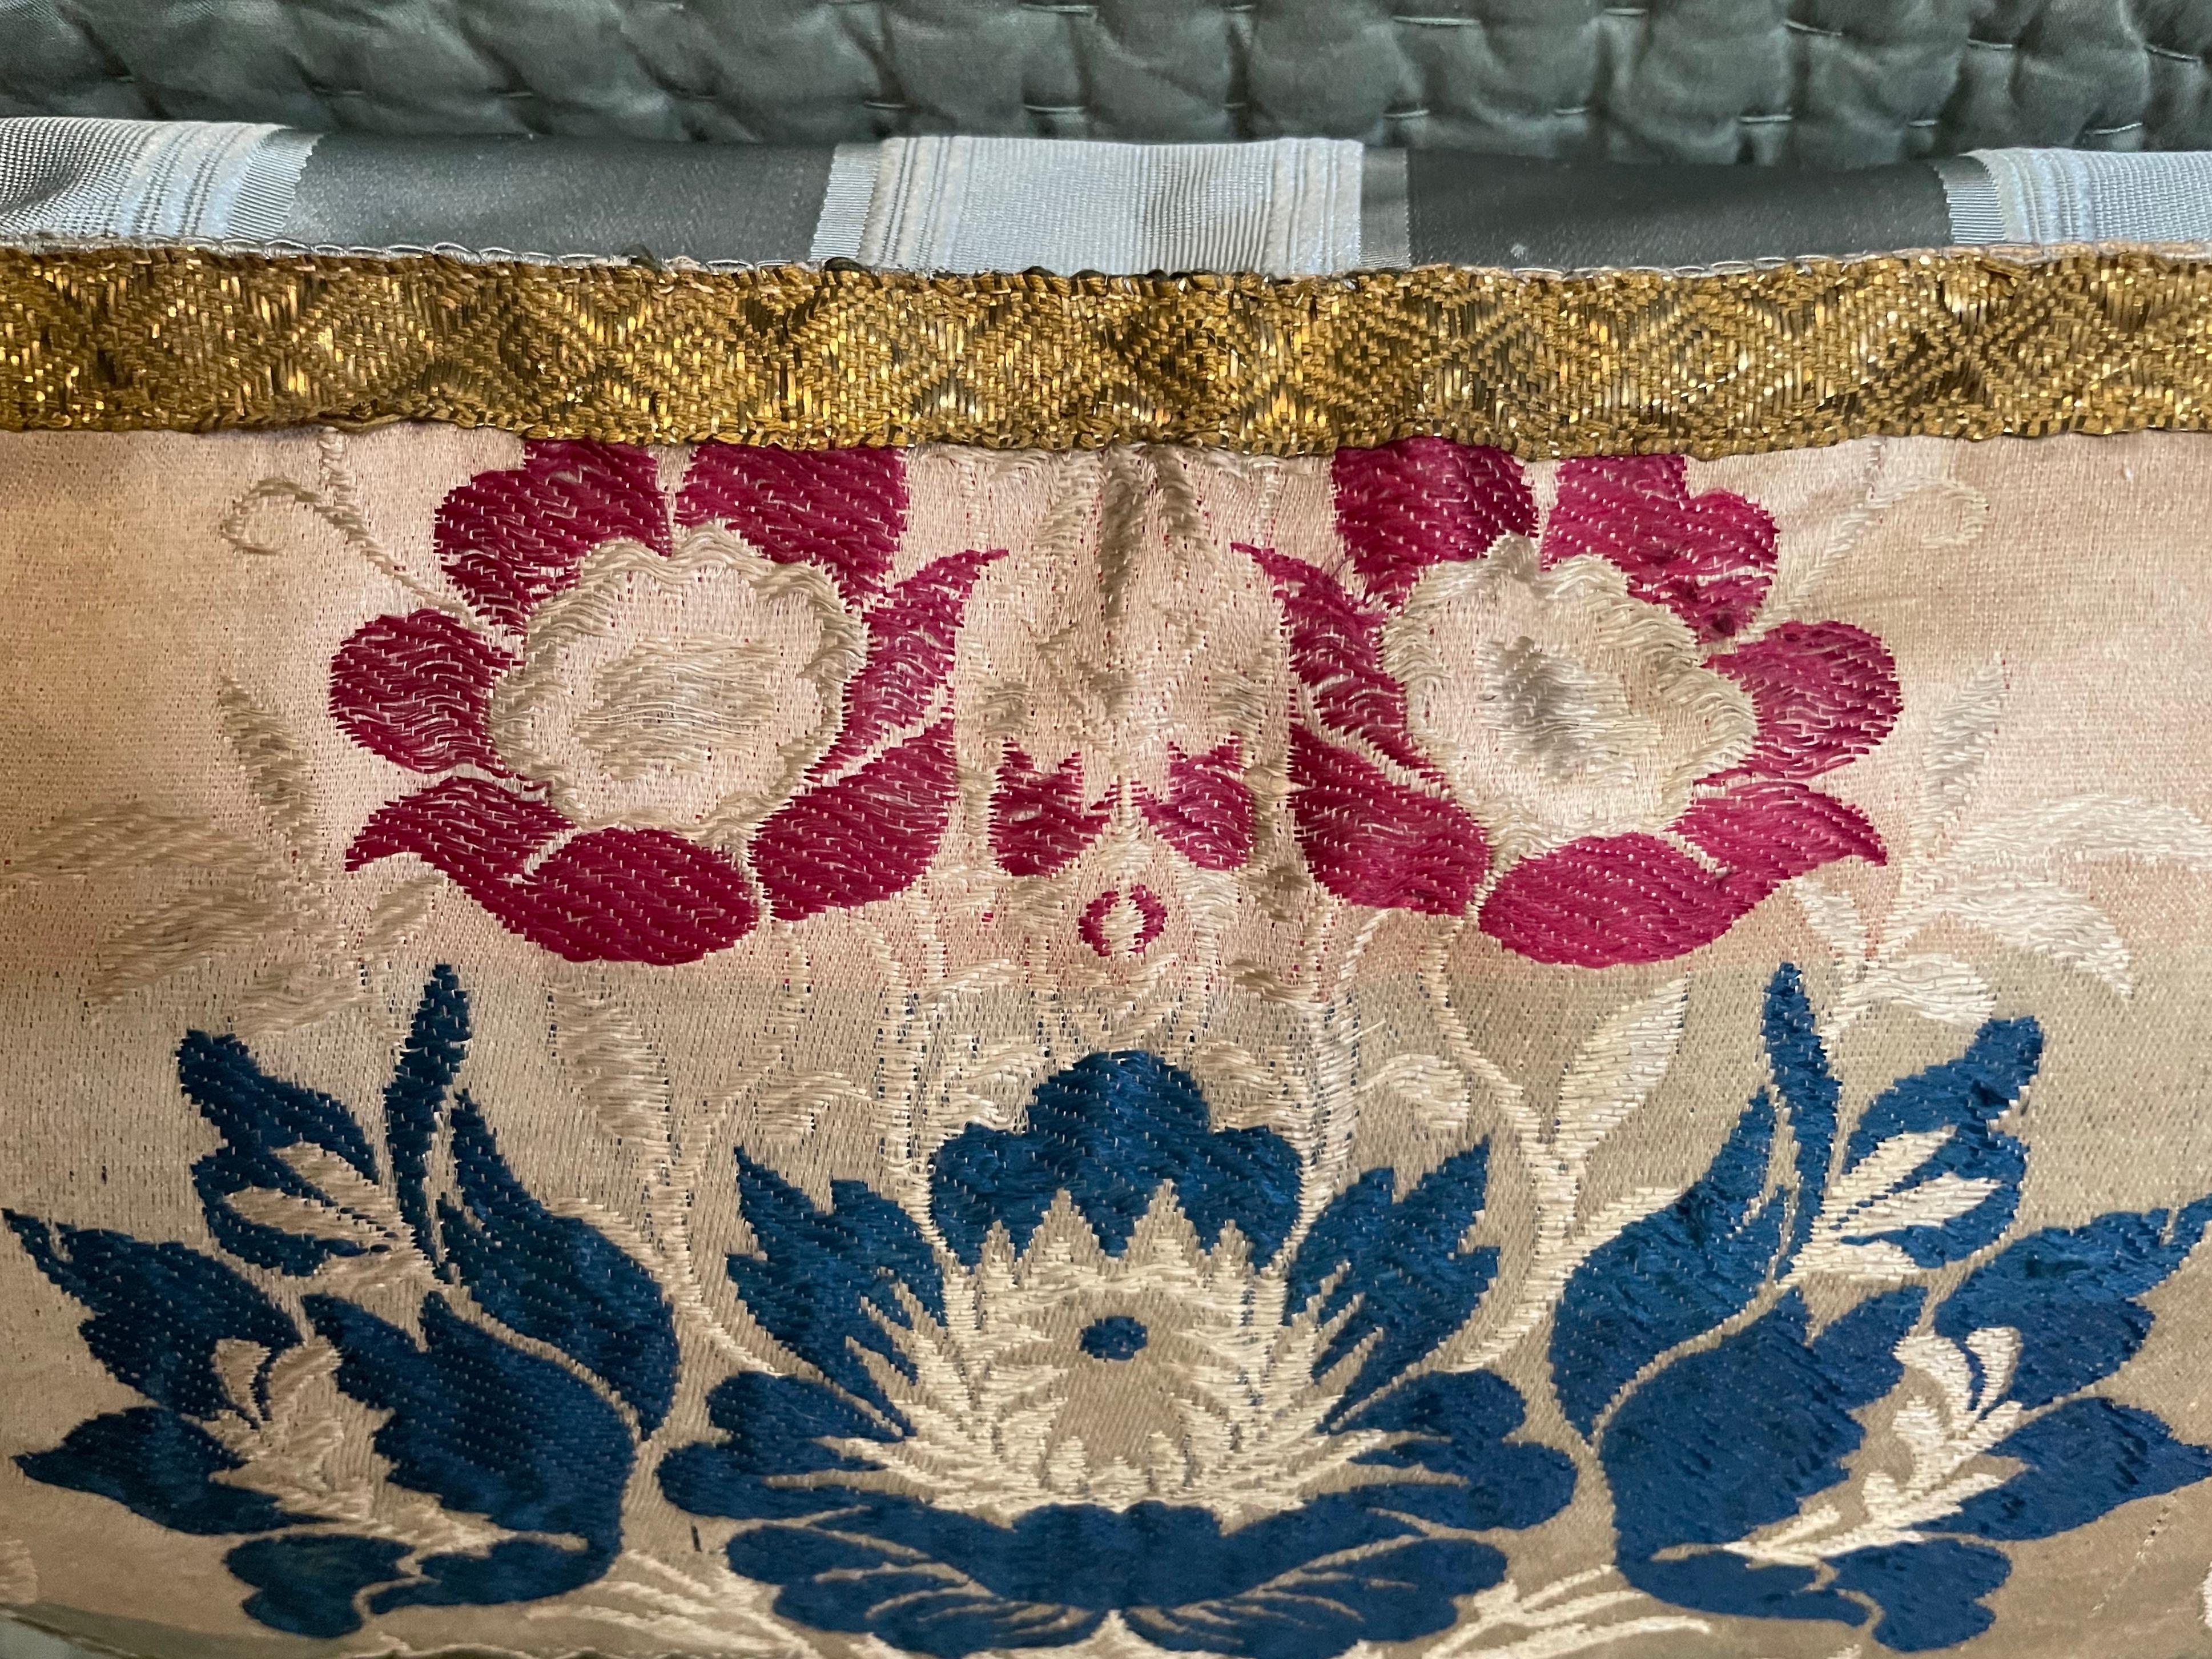 Antique Italian floral pillow.  Continental damascened floral pillow with central decorative moss green urn issuing blue and magenta flowers; antique Italian gilt applied banding at border with antique satin stripe on reverse bordered in antique